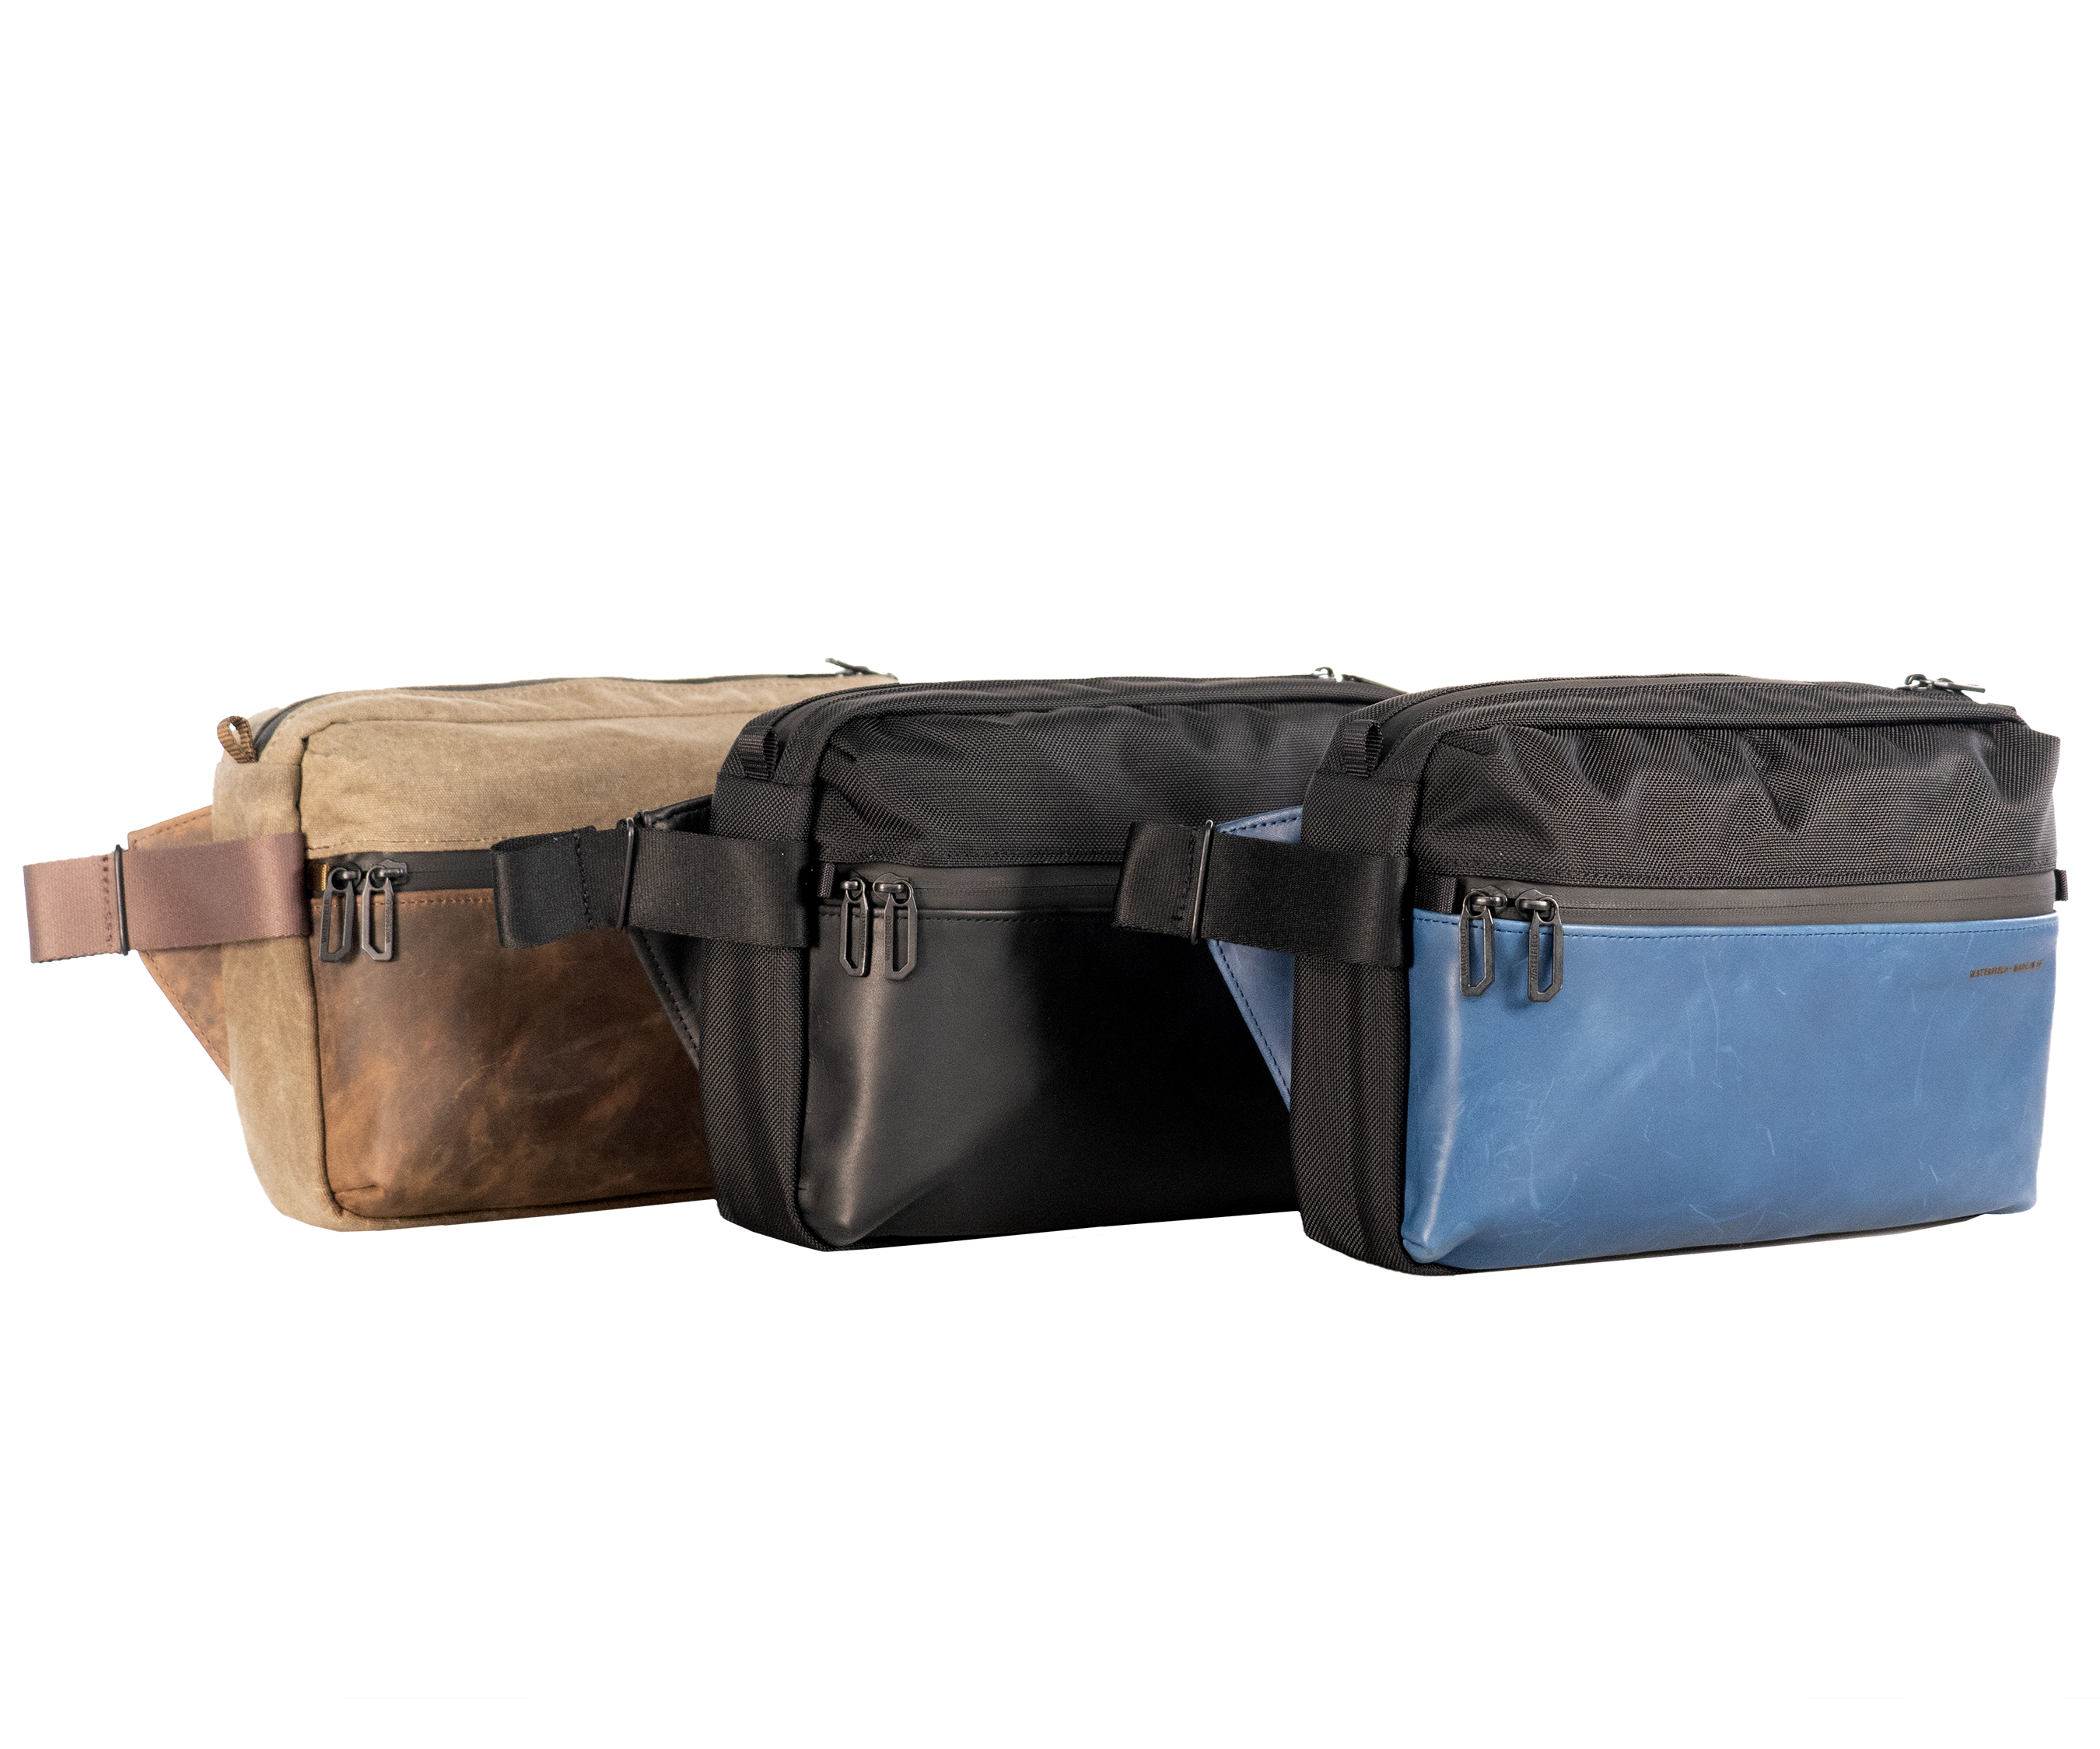 Full-sized Hip Sling Bag in sampling of color choices